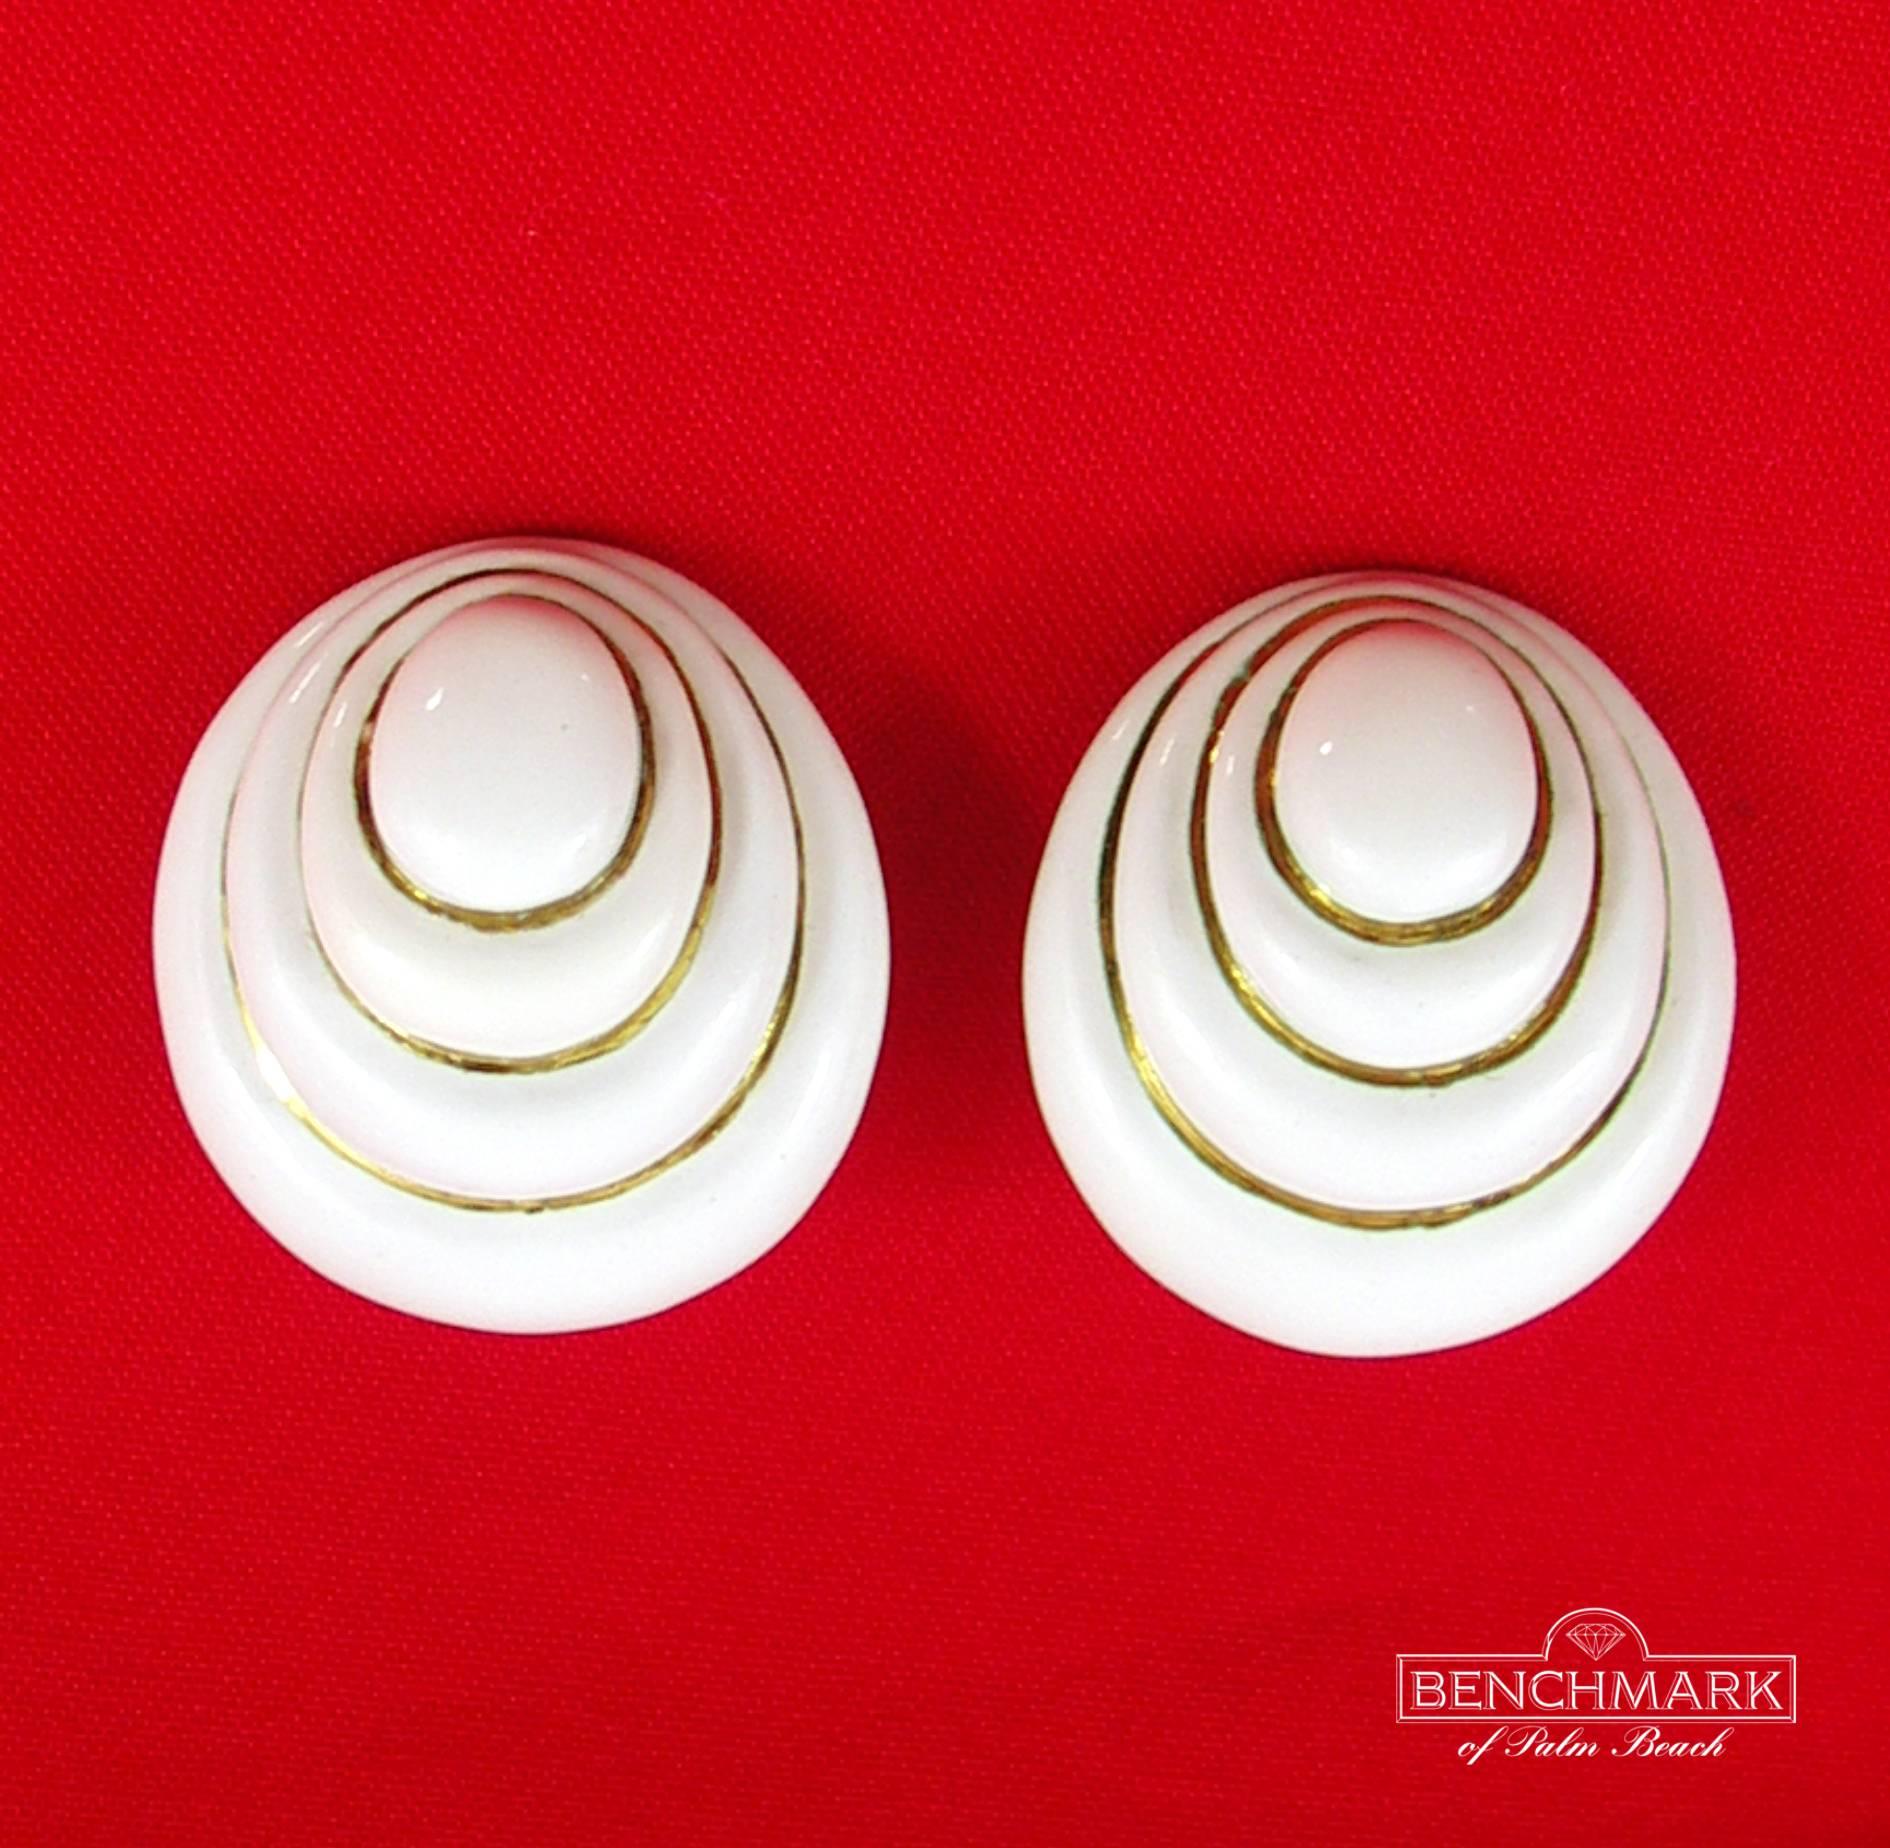 With a shell inspired design, these earrings feature four tiers of white enamel, with bright 18K yellow gold. Measuring 1 3/8 inches long and 1 3/16 inches wide, they are a grand scale but weigh a manageable 43.8 grams. Signed Webb for David Webb.